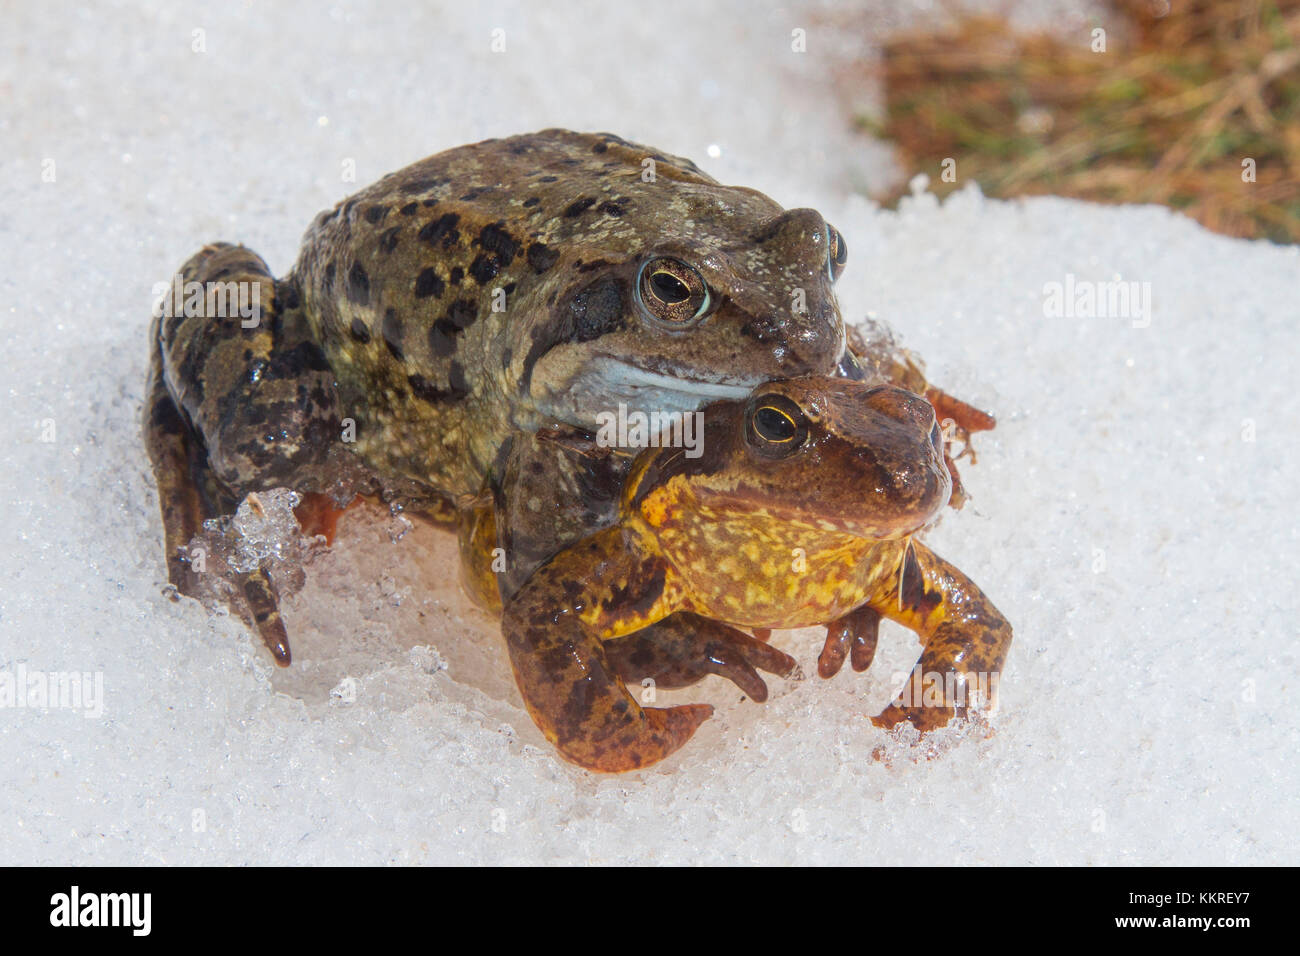 European frogs in coupling. Valtellina, Lombardy, Italy Stock Photo